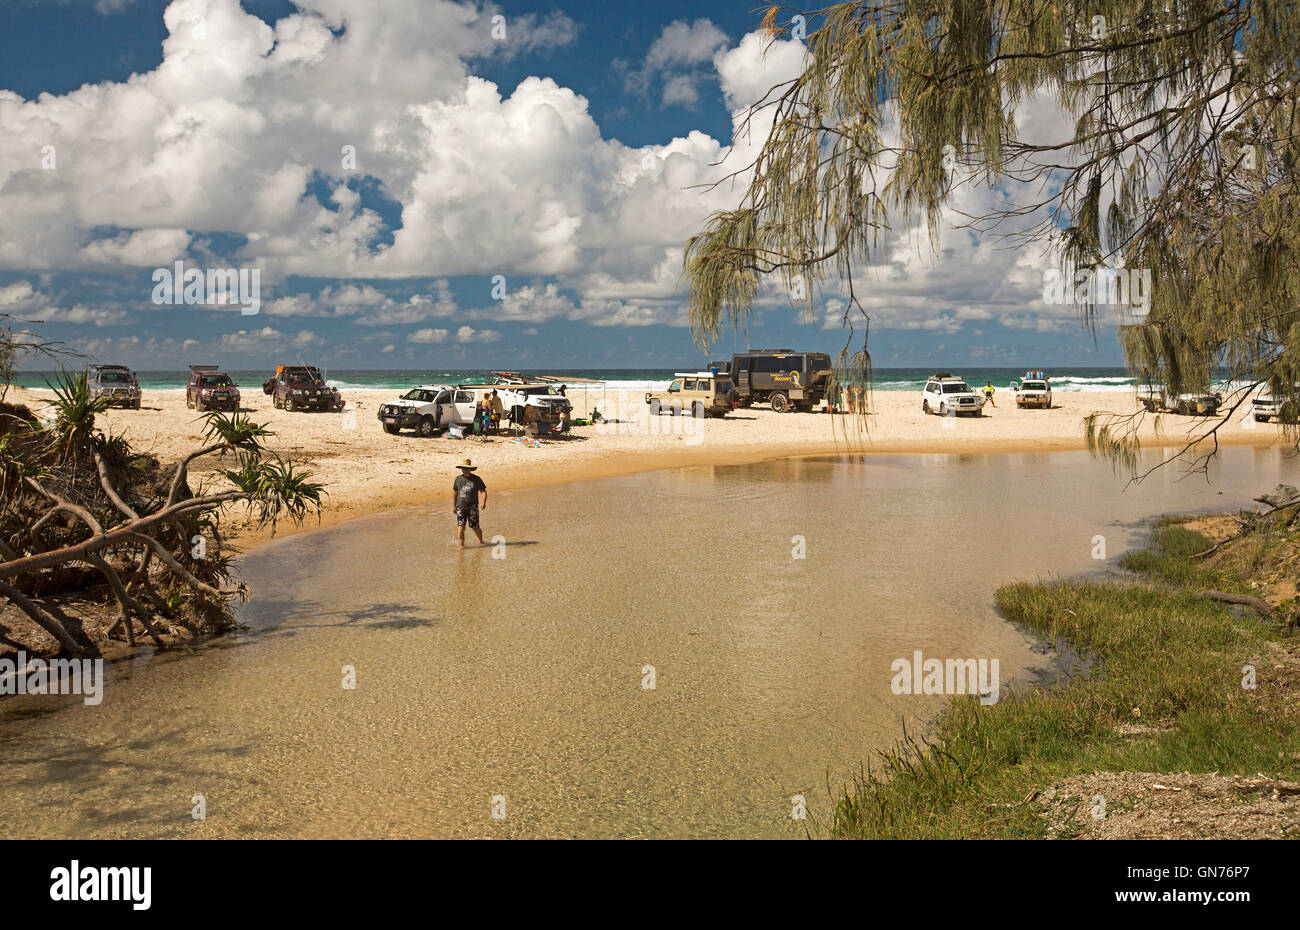 Group of four wheel drive vehicles & people on sandy beach beside Eli Creek, with man wading in shallow water on Fraser Island Stock Photo